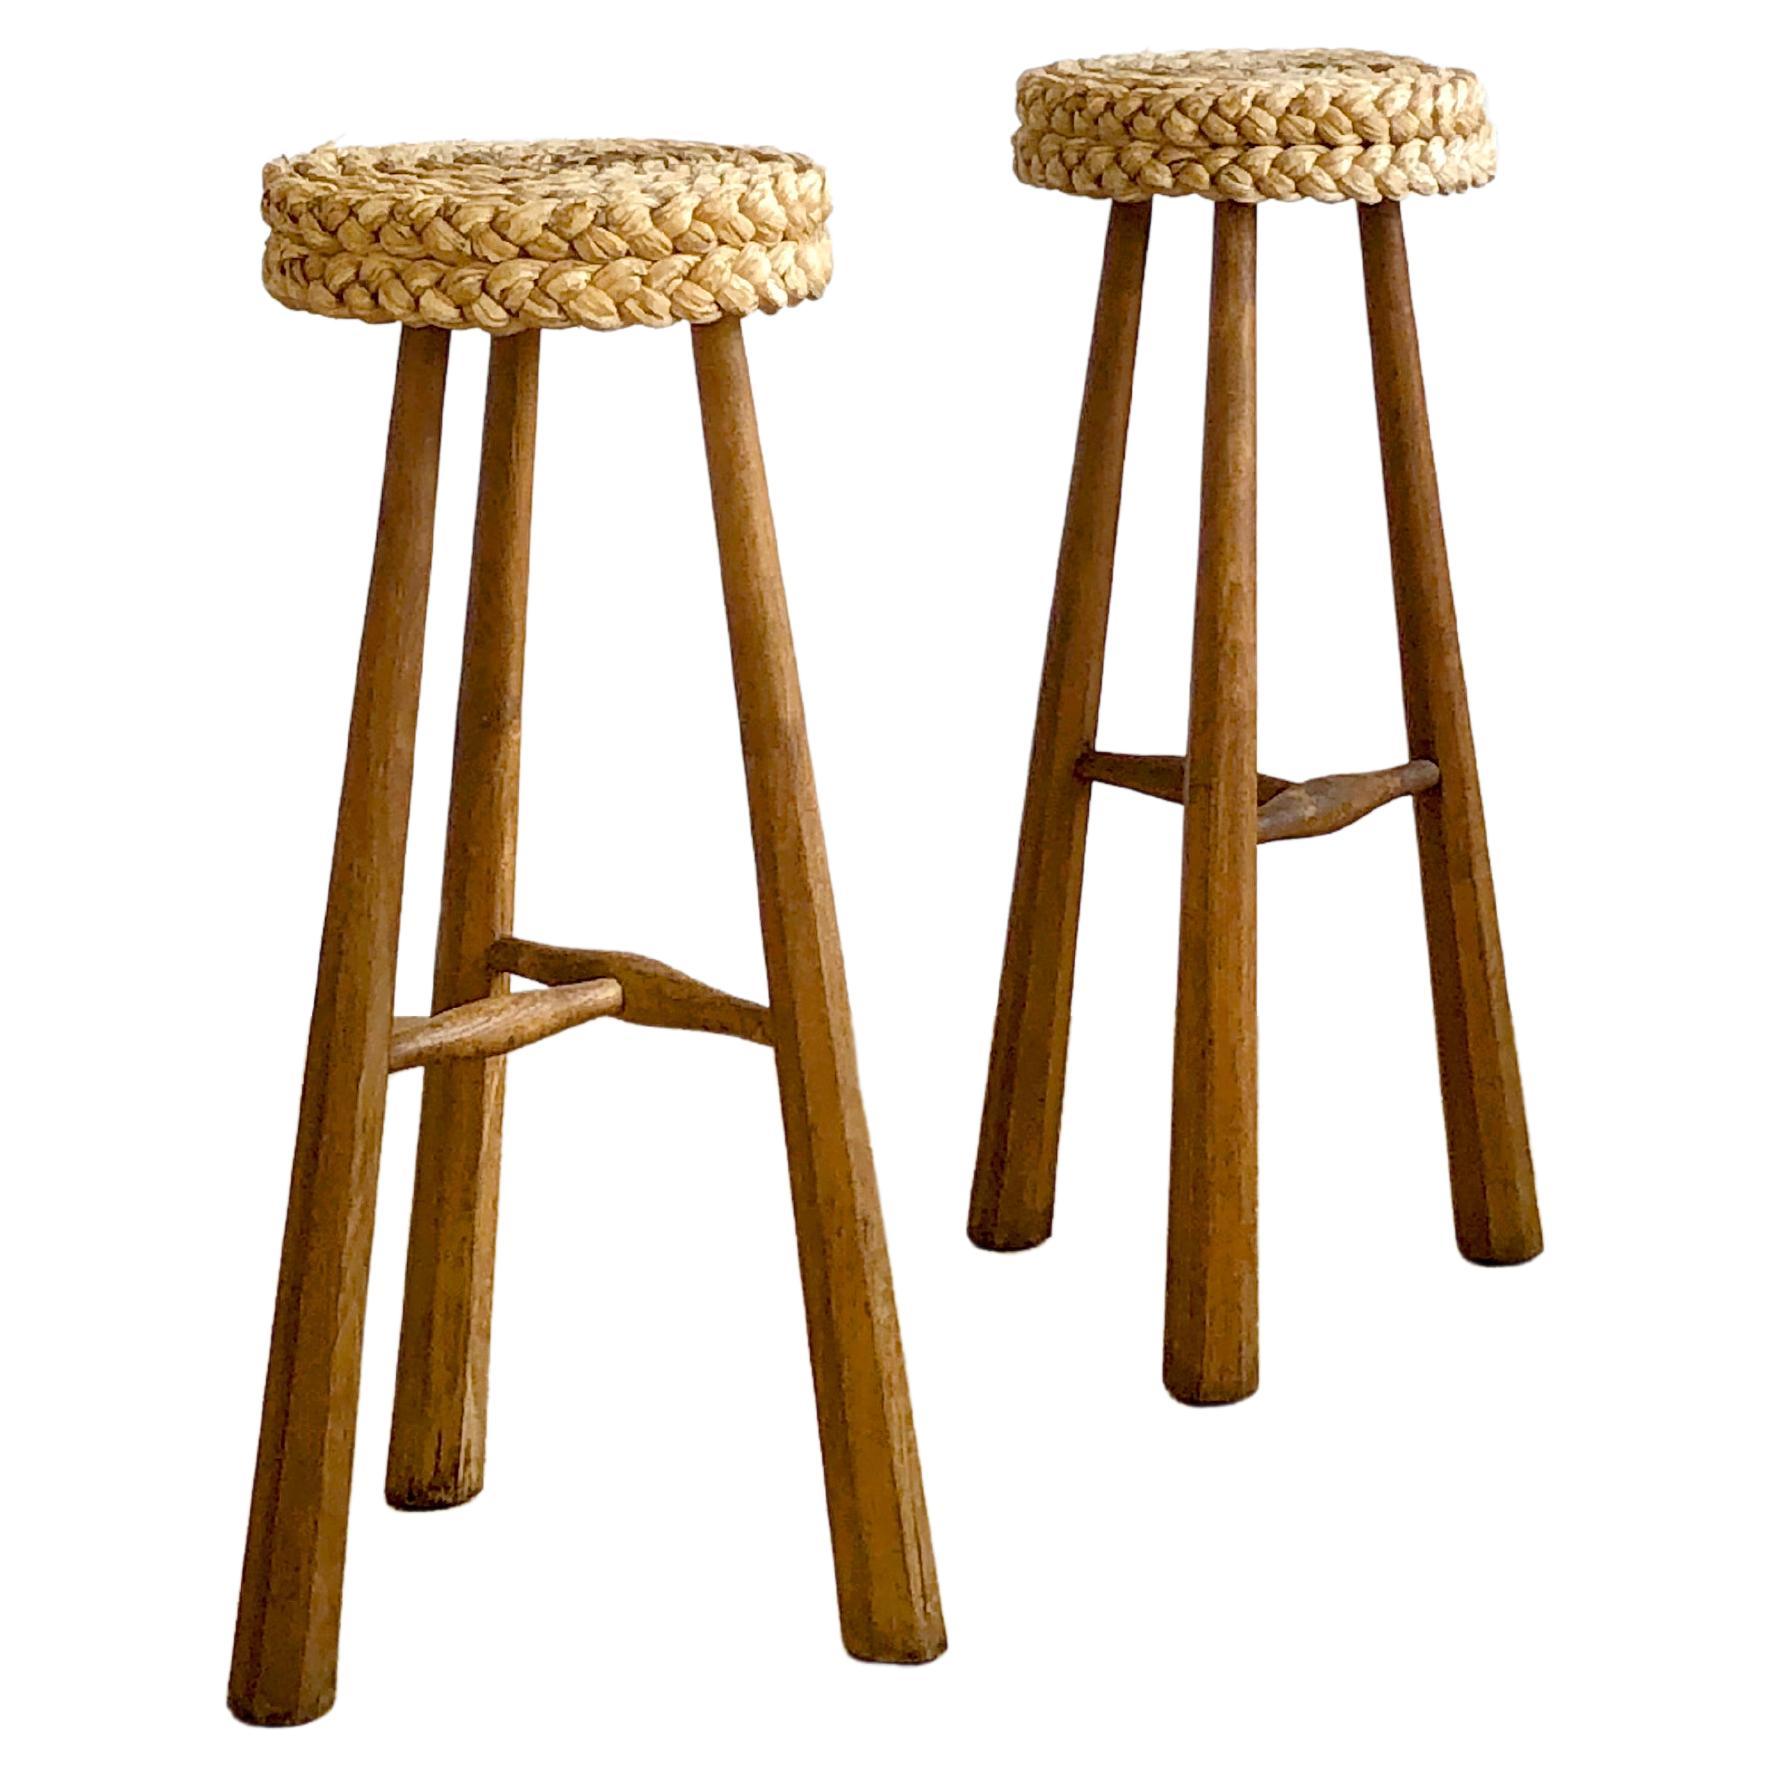 A PAIR OF BRUTALIST BAR STOOLS by AUDOUX-MINNET, France, 1950